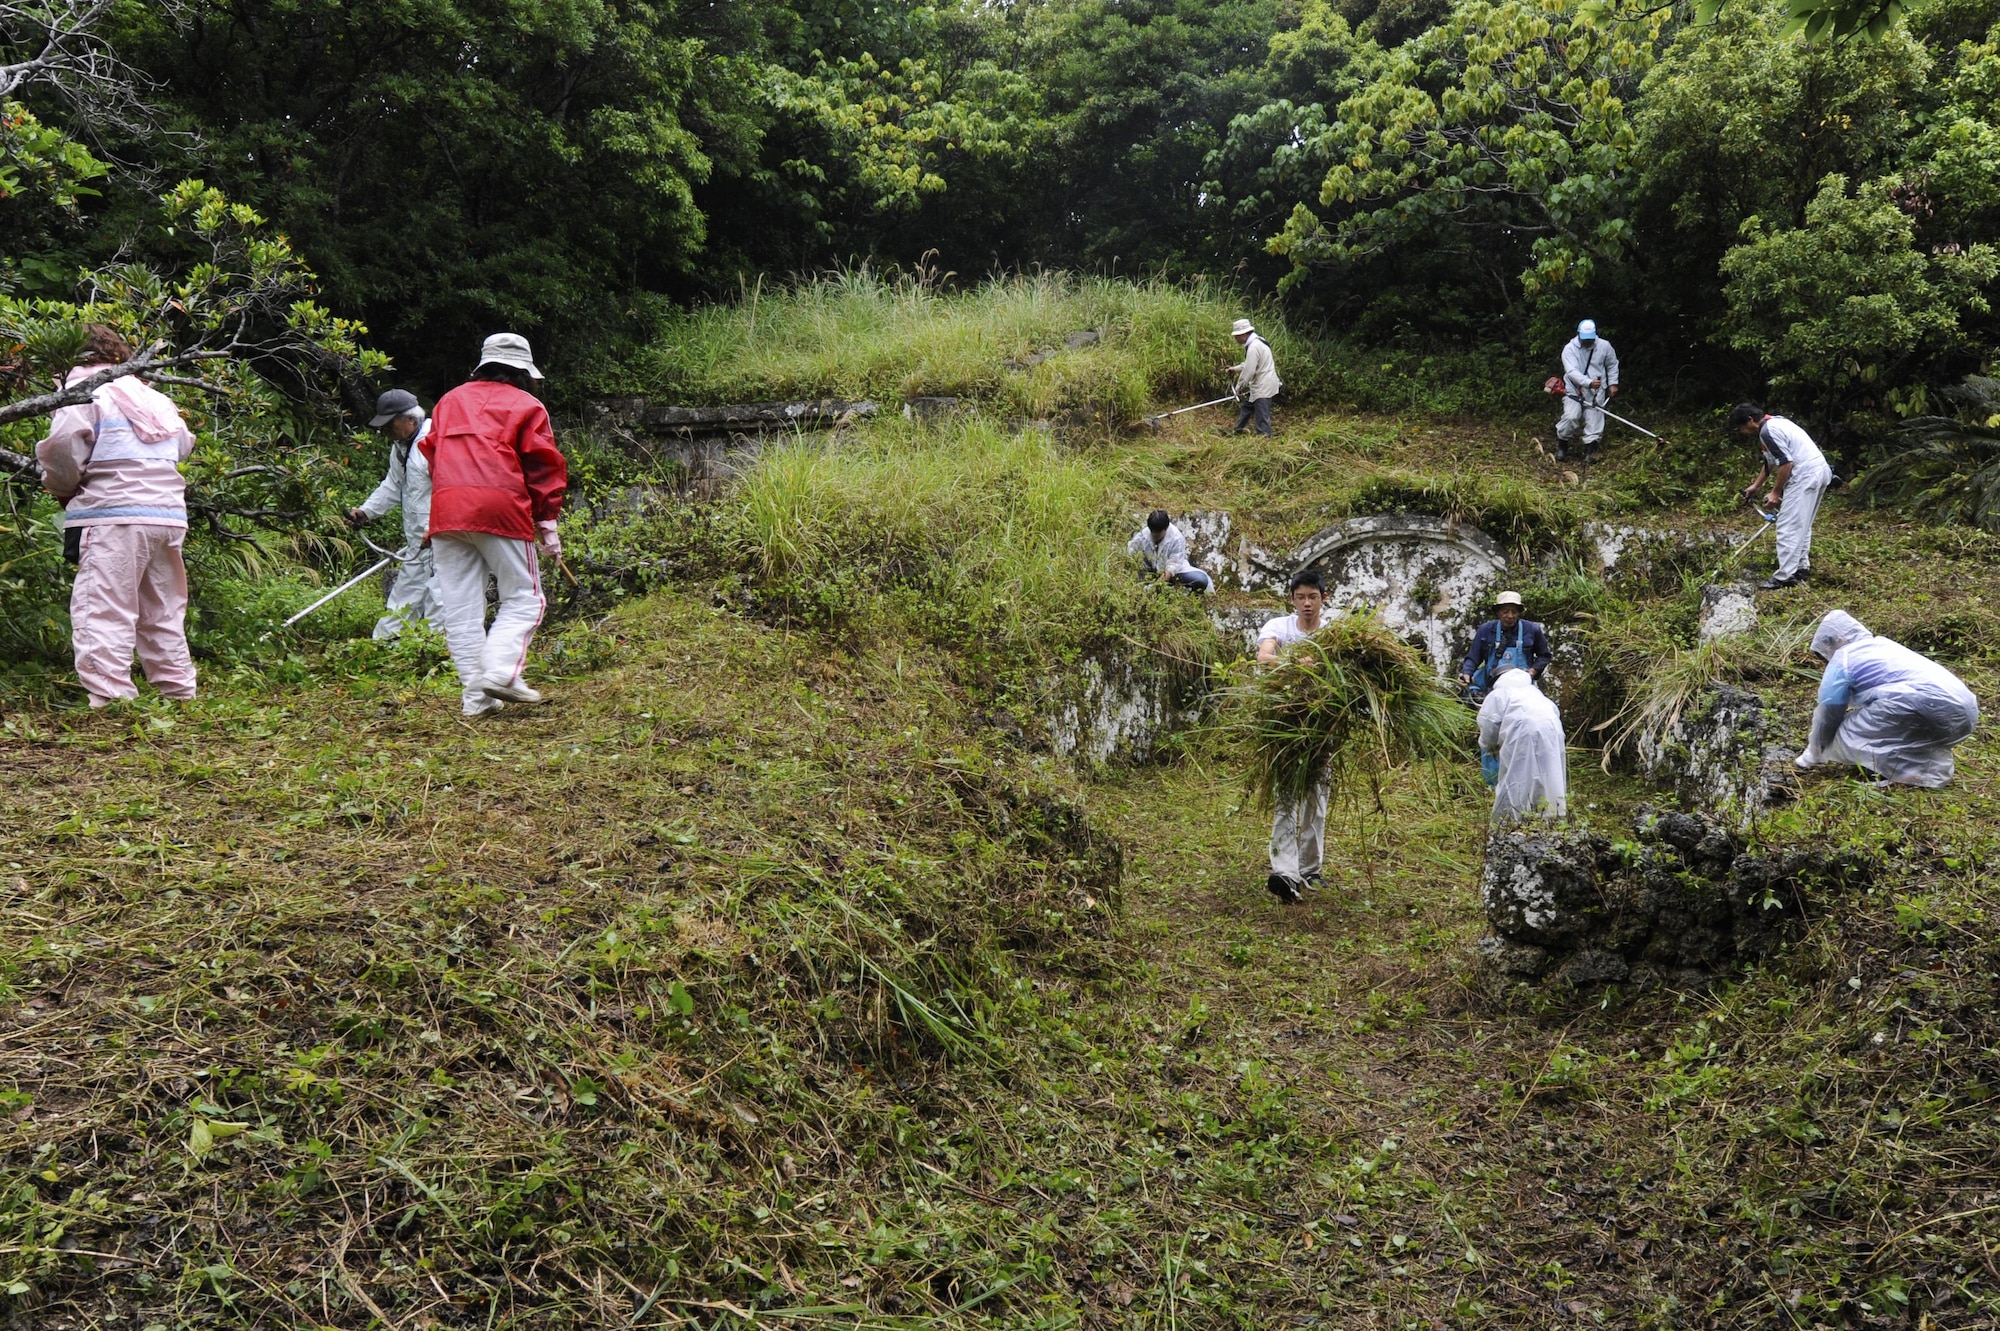 Okinawans clear overgrown plants from the area surrounding their family tomb in preparation for Shimi at Kadena Air Base, Japan, April 12, 2015. Shimi is an annual celebration on Okinawa, during which family tombs and the surrounding areas are cleaned before extended family members gather to pray and offer food to their ancestors. More than 400 locals visited the base this year to pray, eat and enjoy each other’s company. (U.S. Air Force photo/Staff Sgt. Marcus Morris)